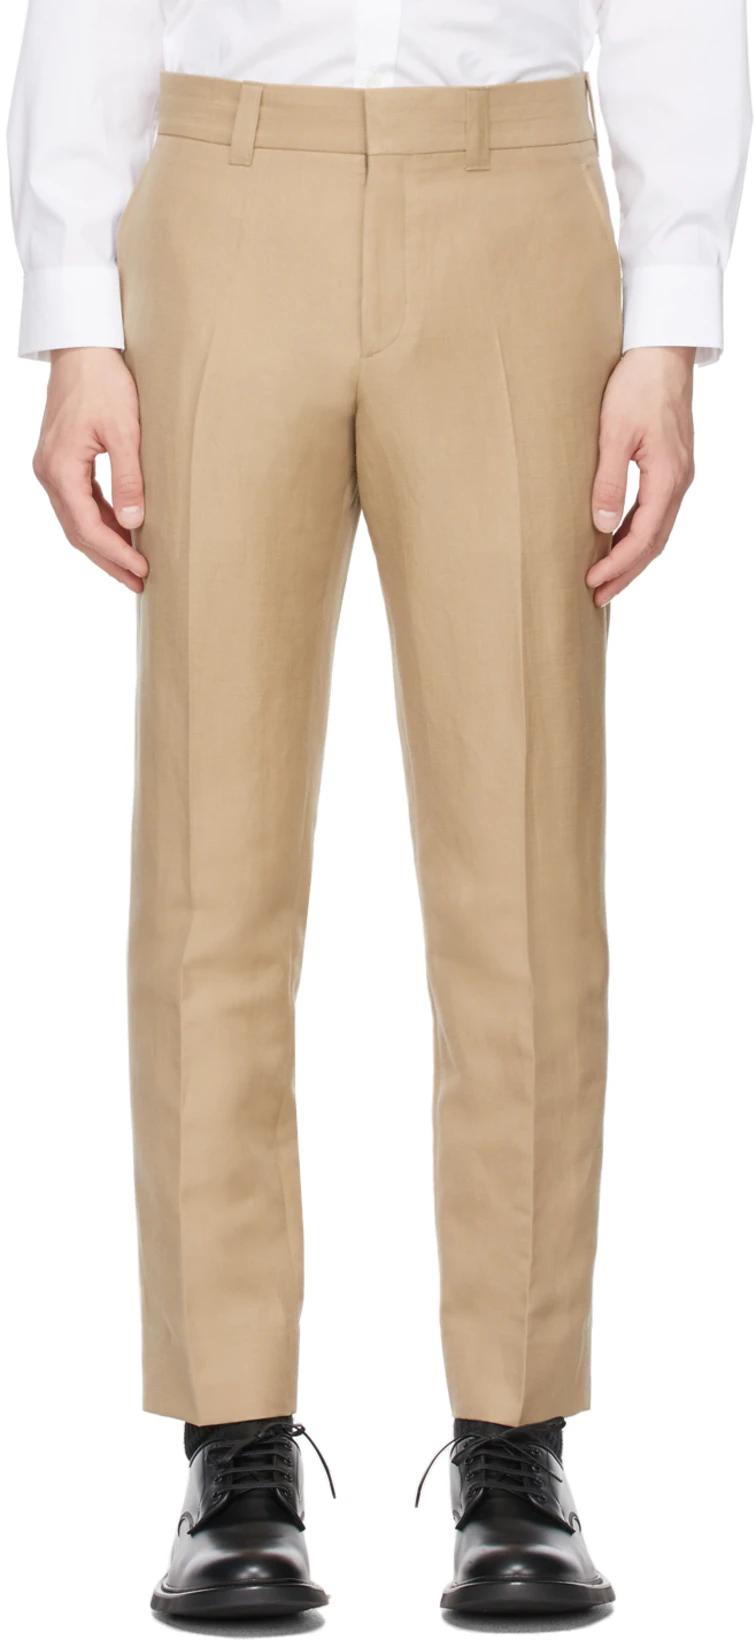 Slacks and Chinos Slacks and Chinos Burberry Trousers Save 40% Mens Trousers Burberry Logo-plaque Corduroy Cargo Trousers in Brown for Men 